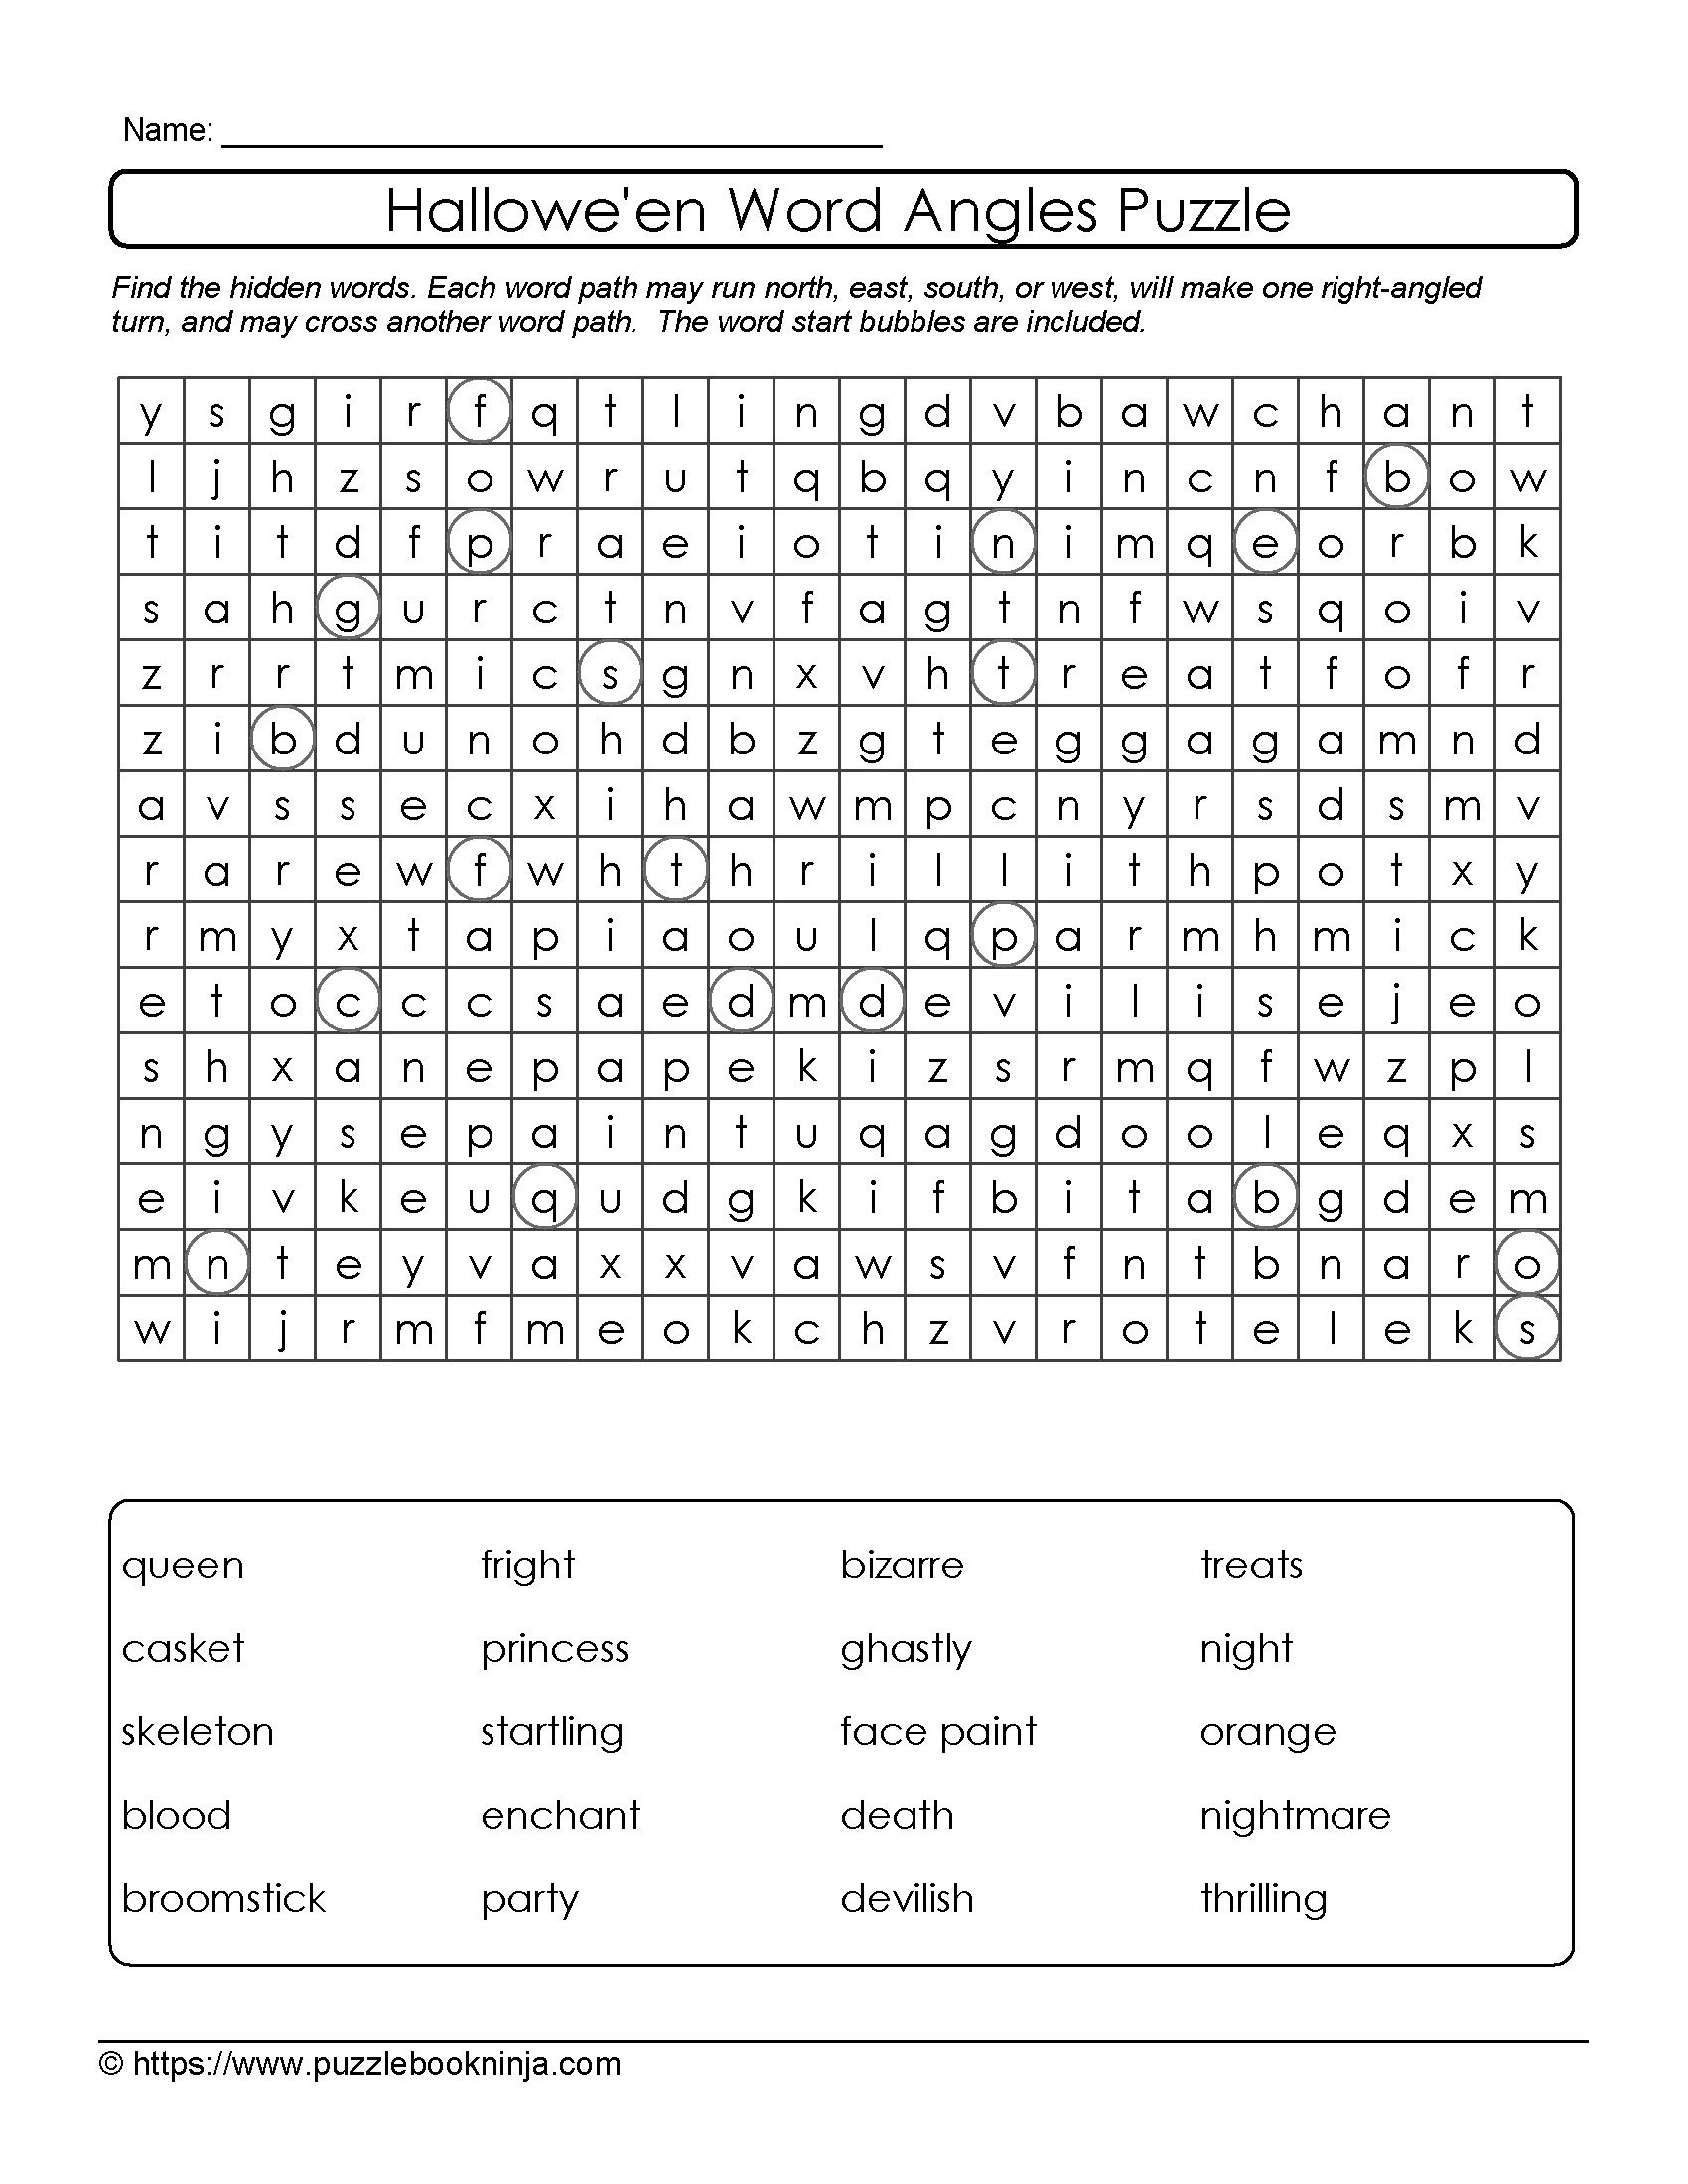 Free Halloween Word Search Printable Puzzle. Word Start Bubbles. All - Printable Halloween Puzzle